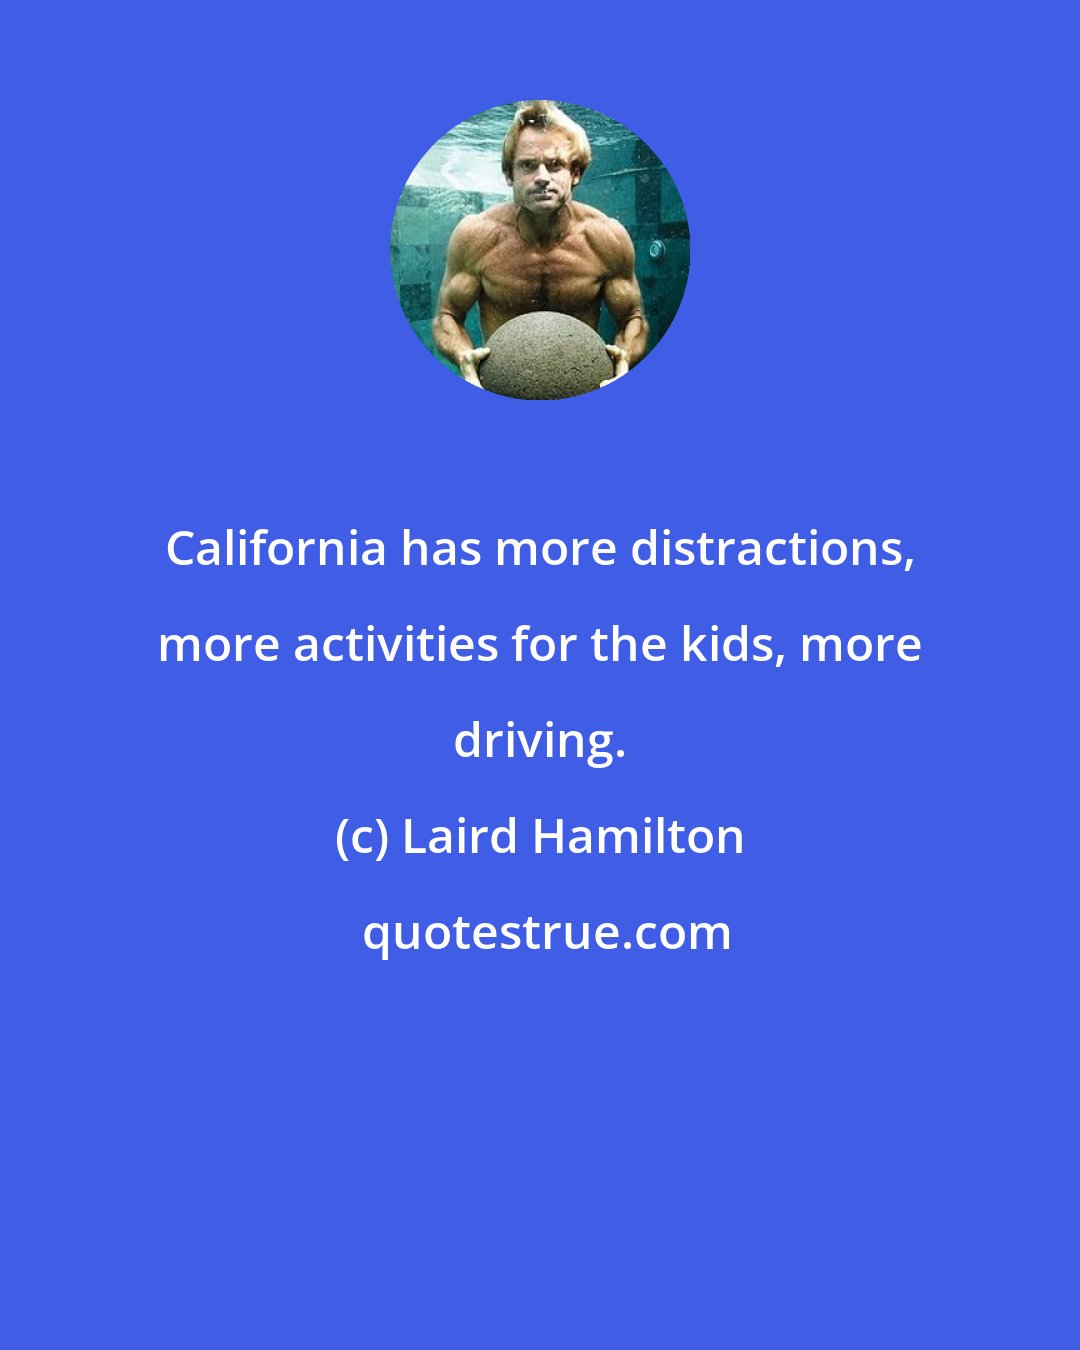 Laird Hamilton: California has more distractions, more activities for the kids, more driving.